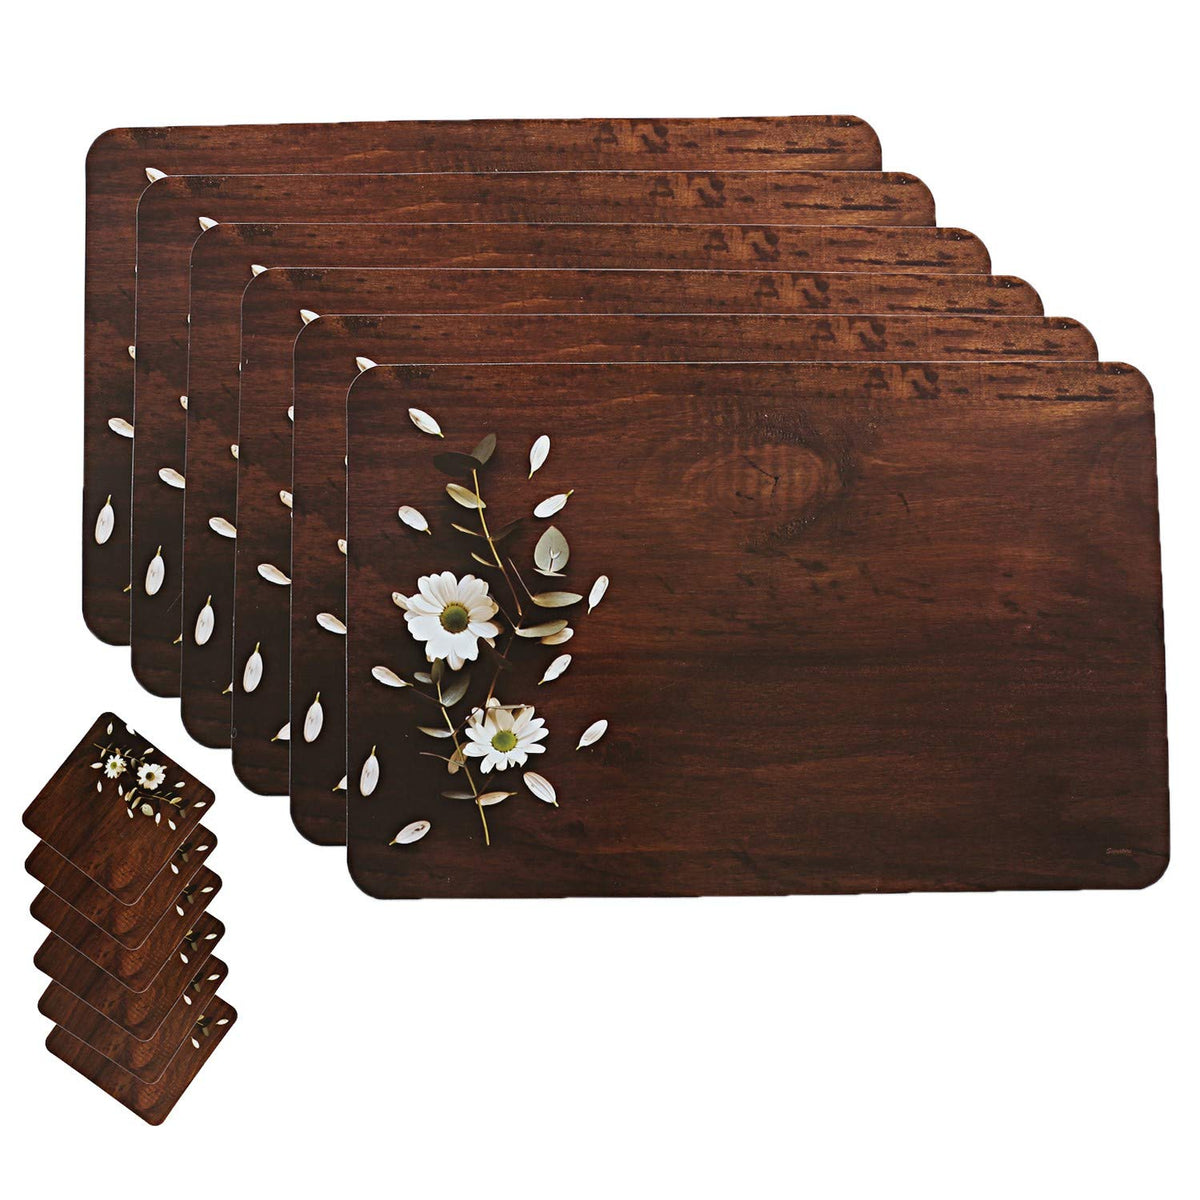 Kuber Industries PVC Wooden Design Table Placemat Set with Tea Coasters|Rectangular Shape & Floral Print|6 Placemat & 6 Tea Coaster, Pack of 12 (Multicolour)